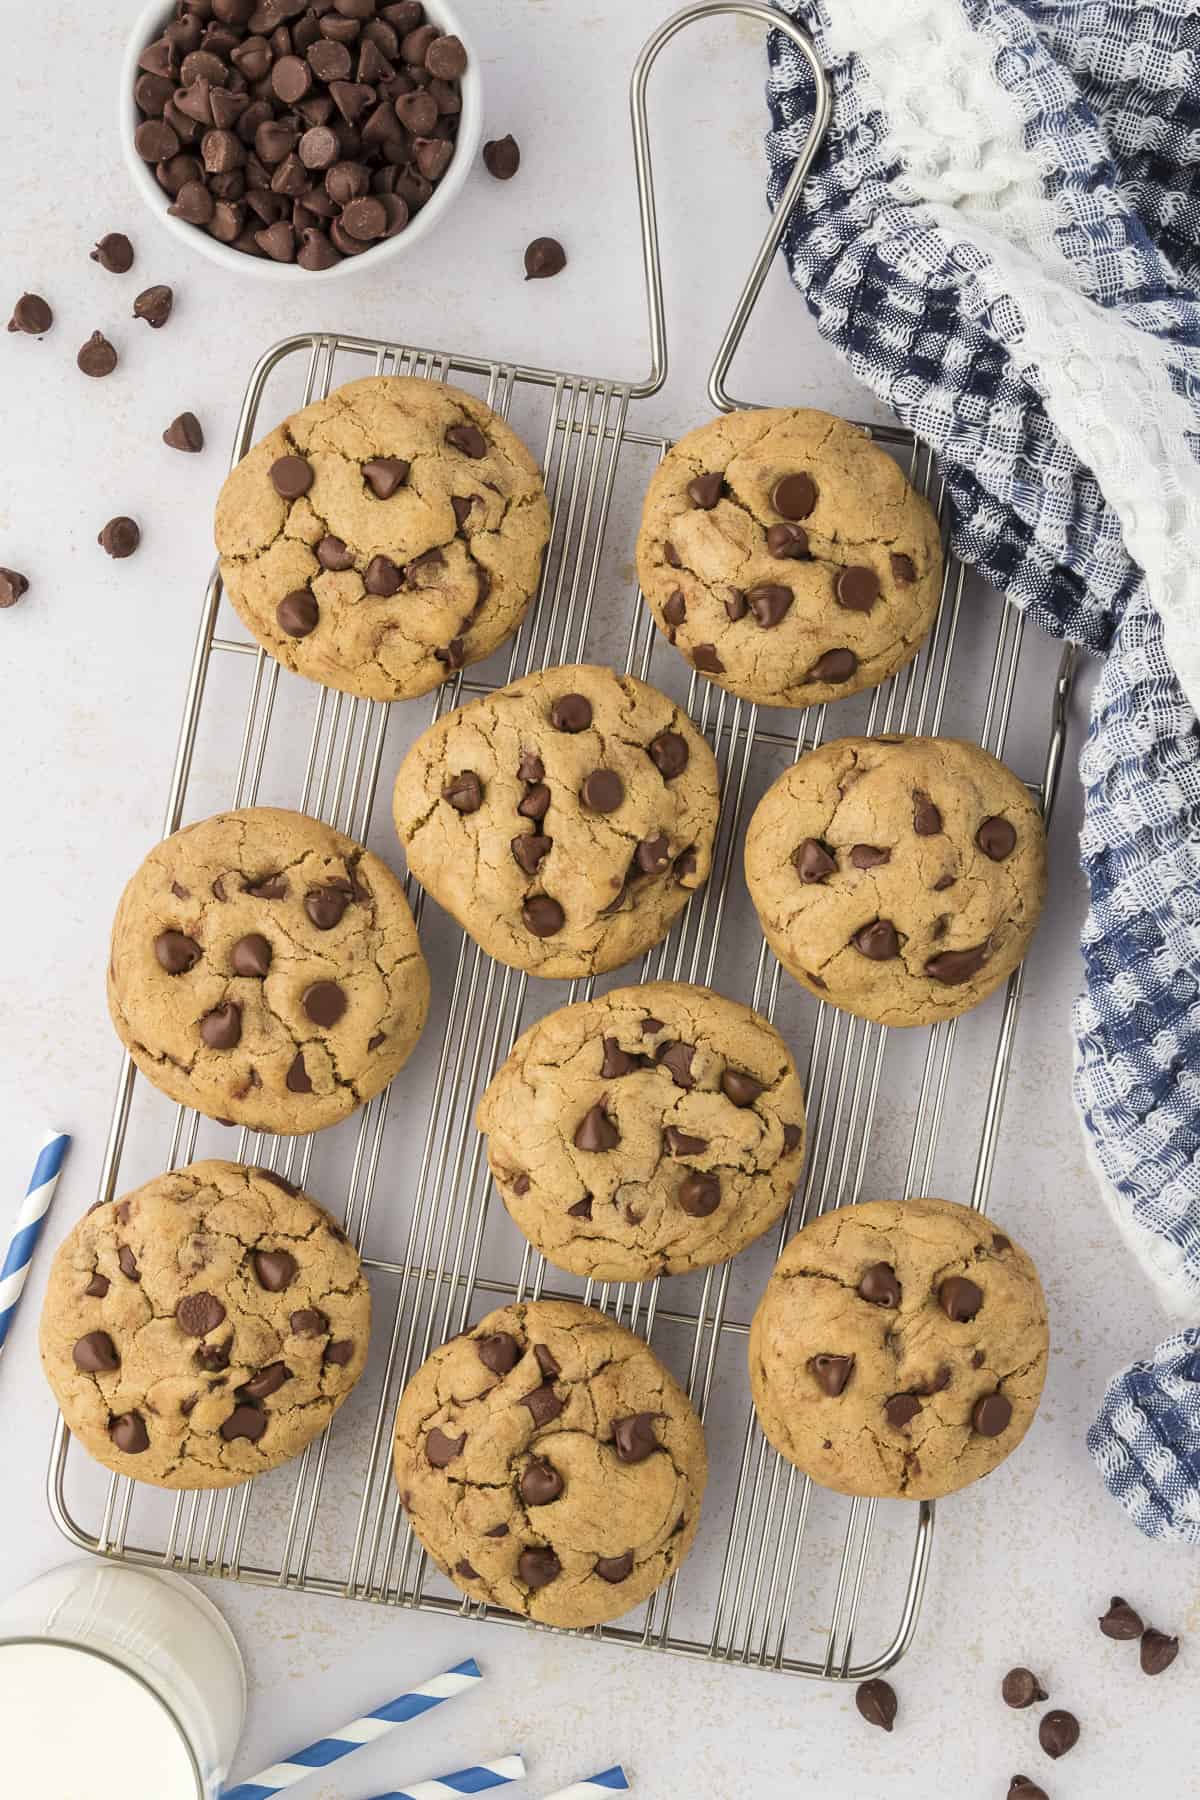 https://www.bunsinmyoven.com/wp-content/uploads/2018/04/baked-perfect-chocolate-chip-cookies.jpg